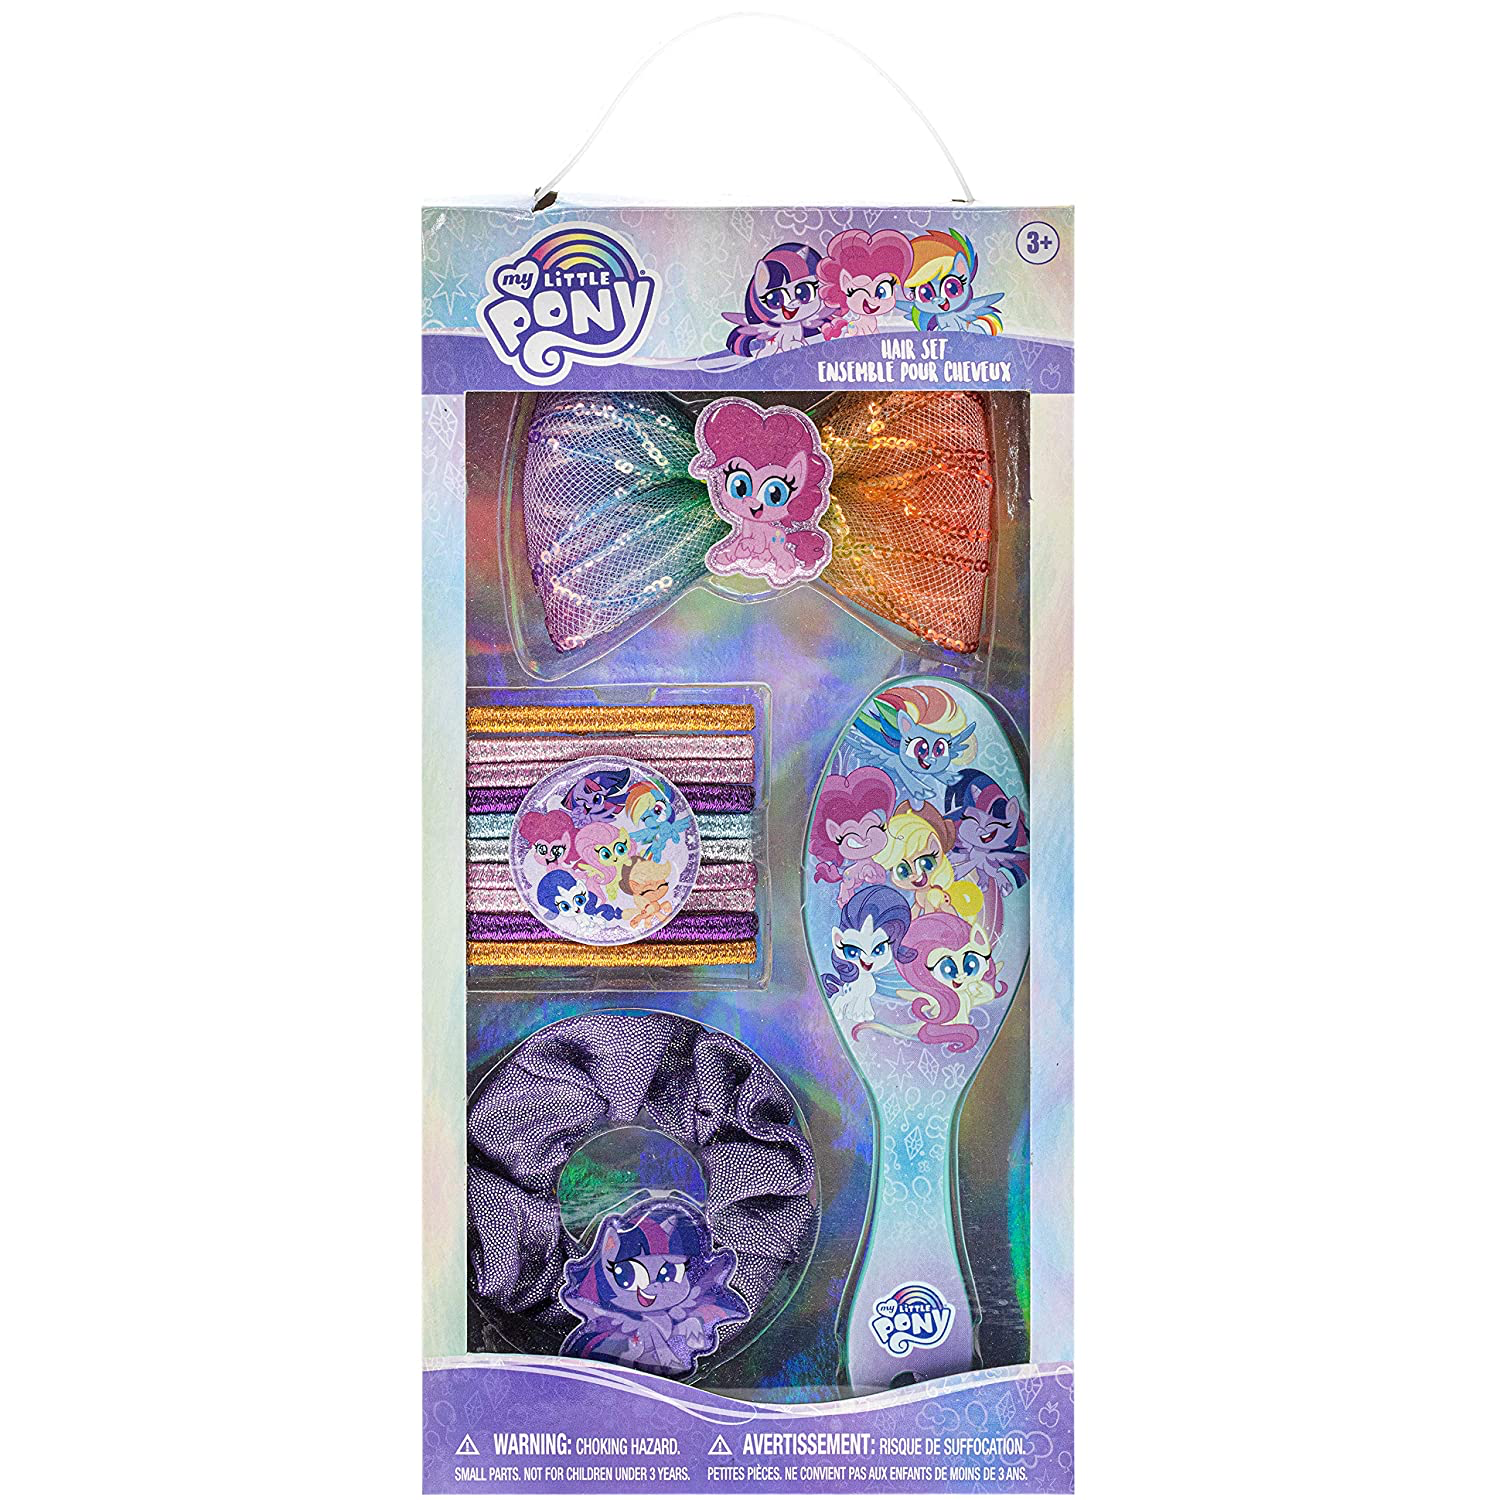 New My Little Pony: Pony Life Hair Accessory Set available now! - My ...